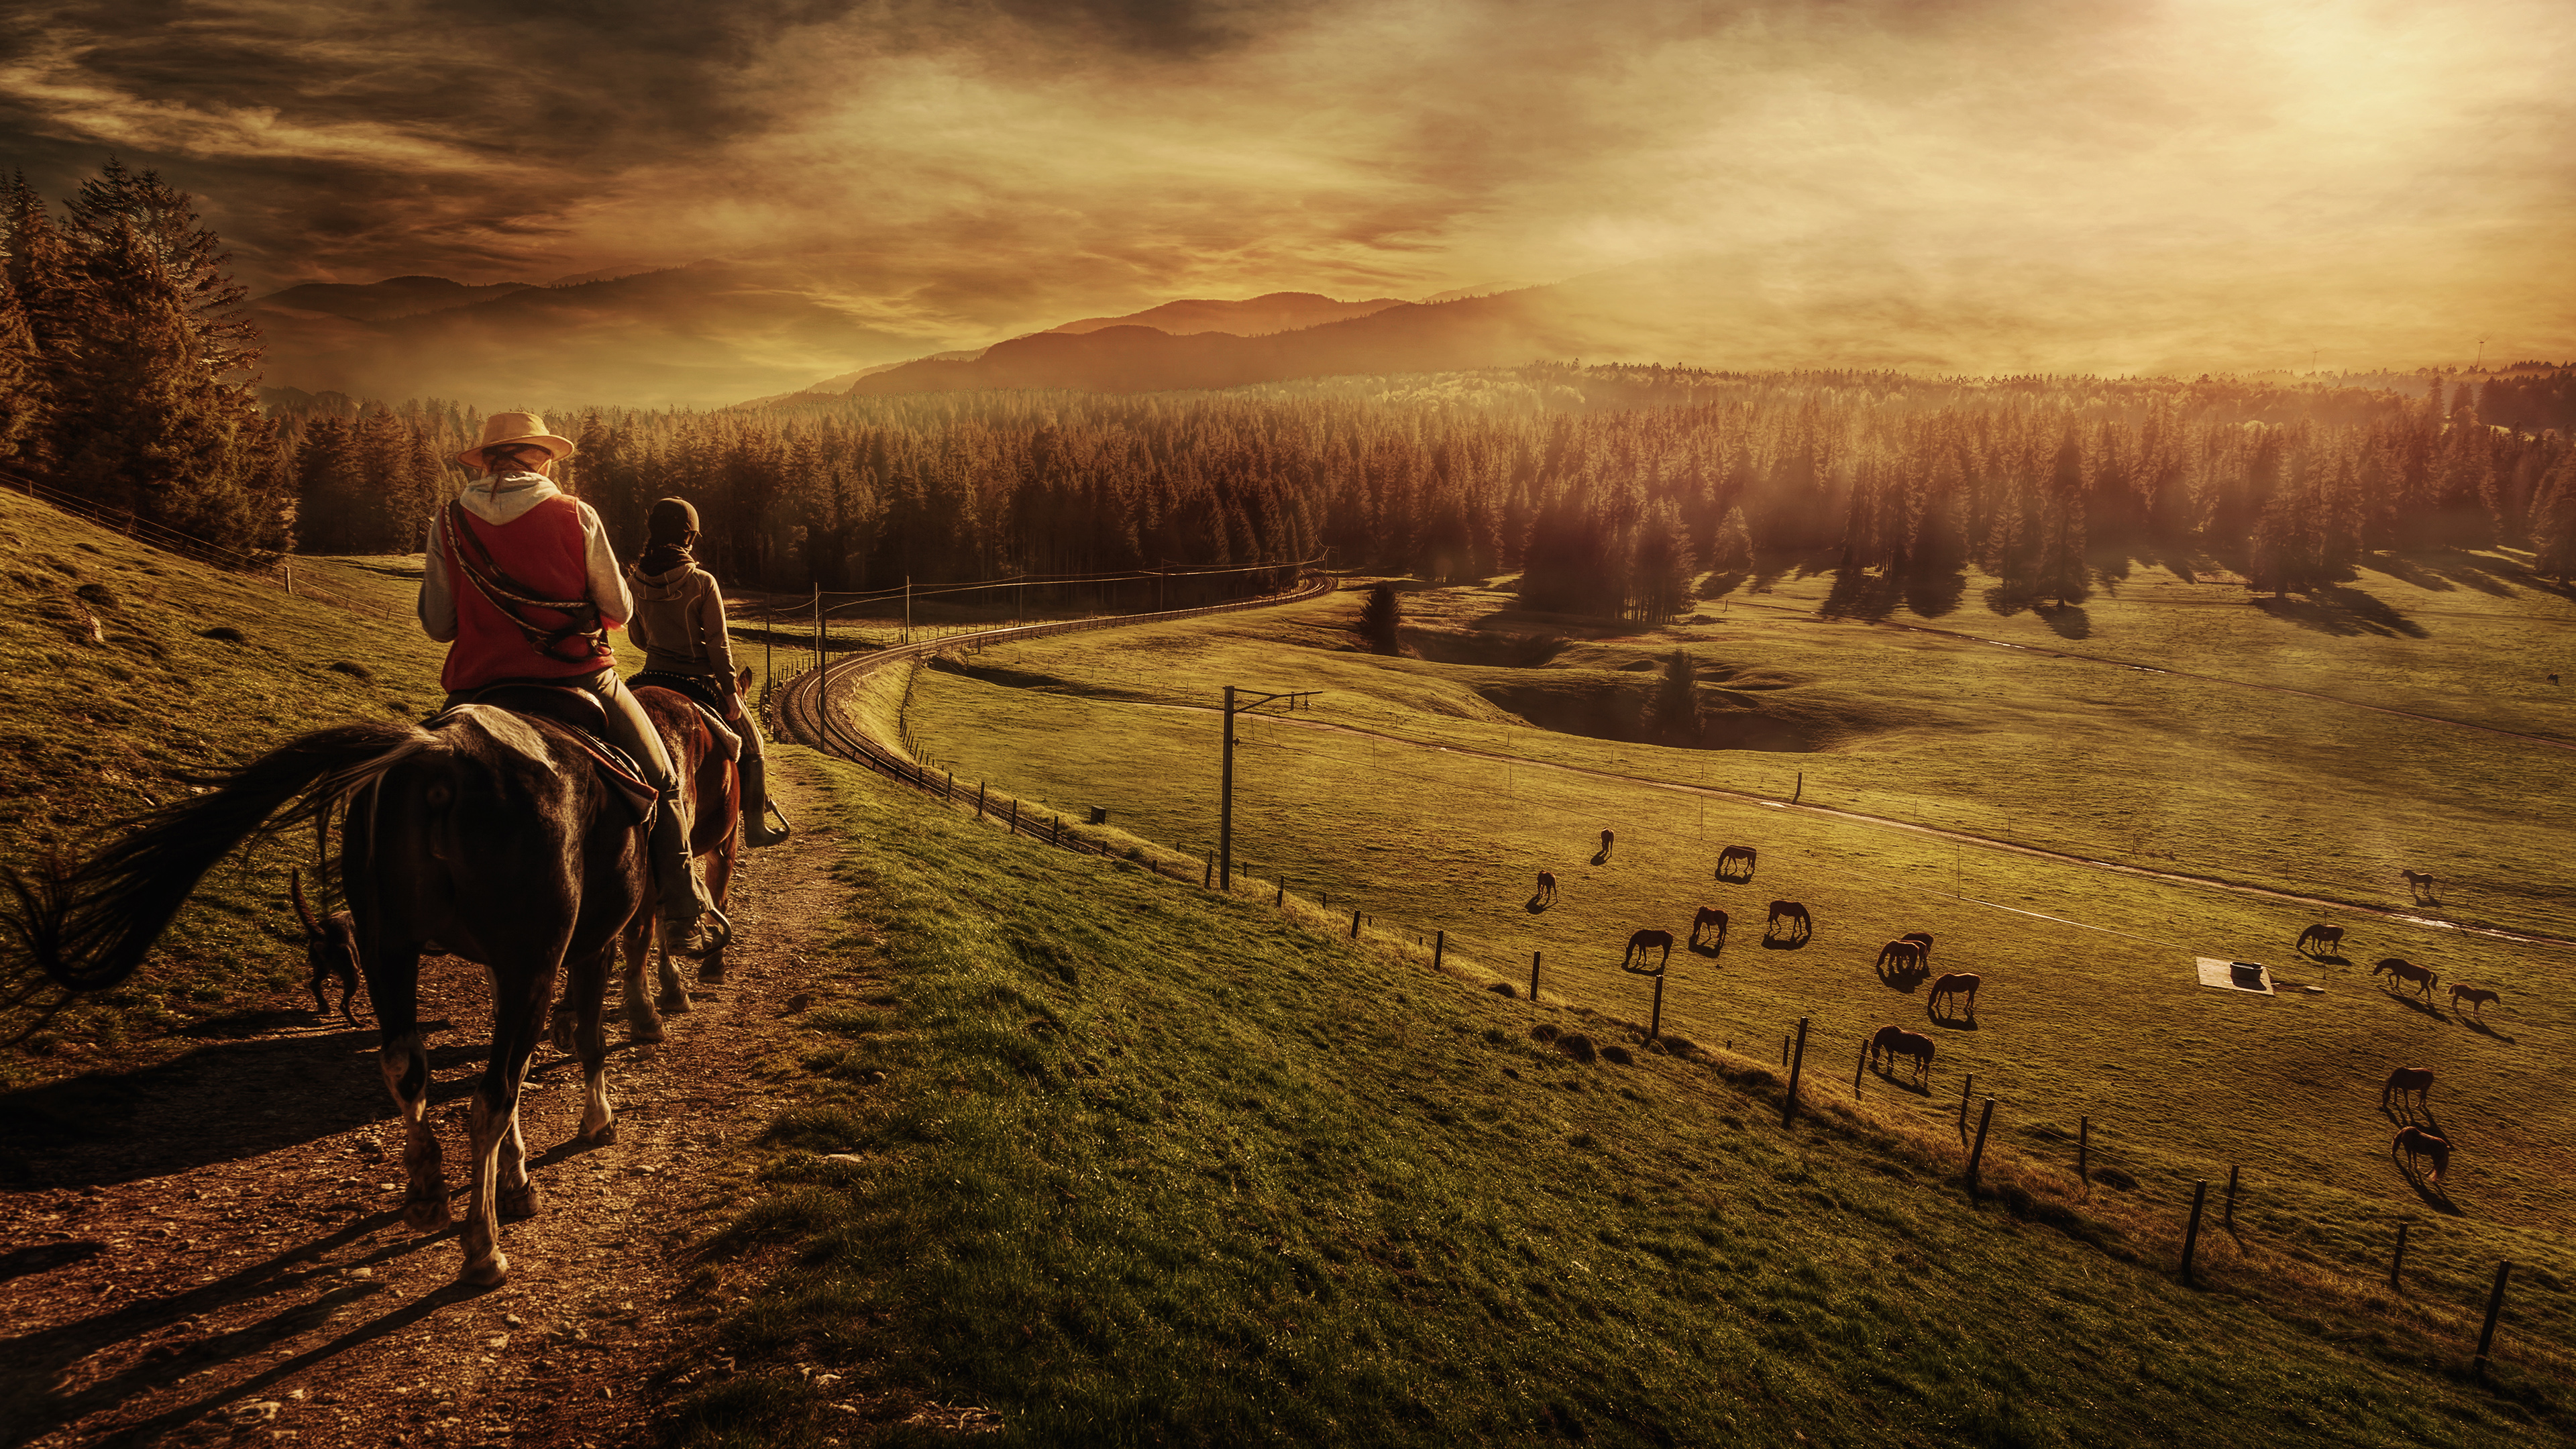 landscape, sunset, people, photography, horse, horse riding Full HD